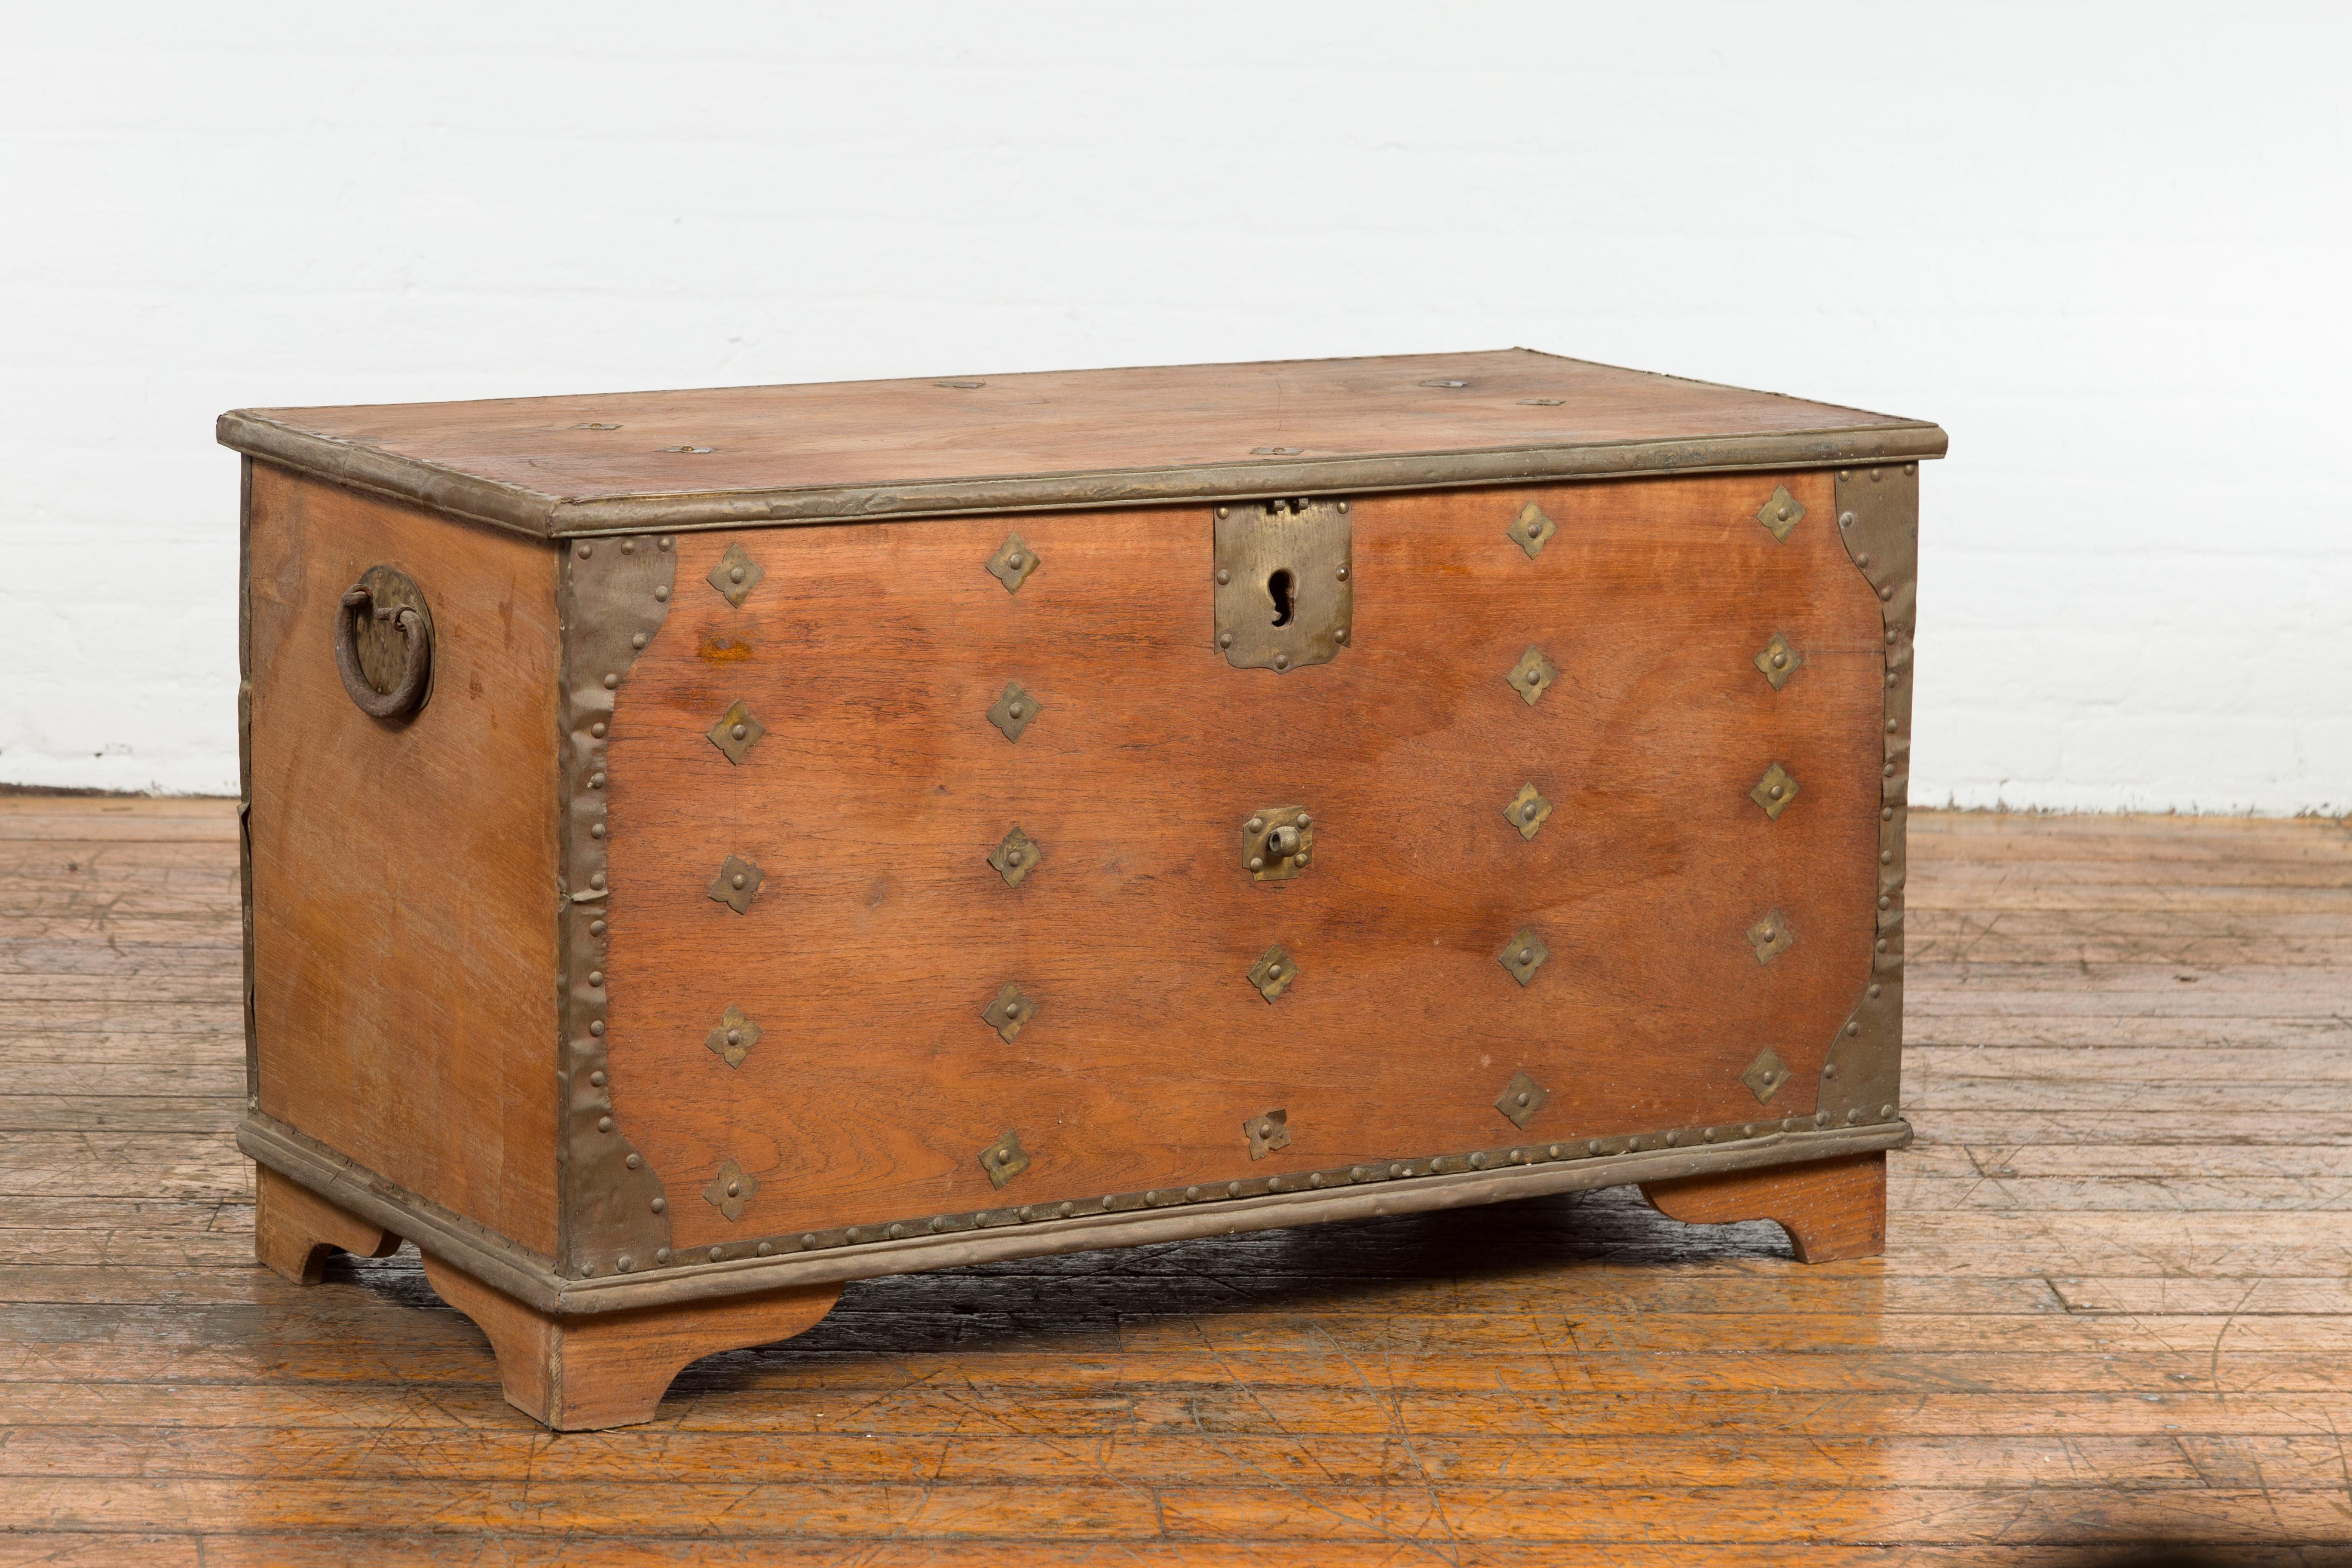 Rustic Indonesian 19th Century Wooden Blanket Chest with Brass Accents For Sale 11